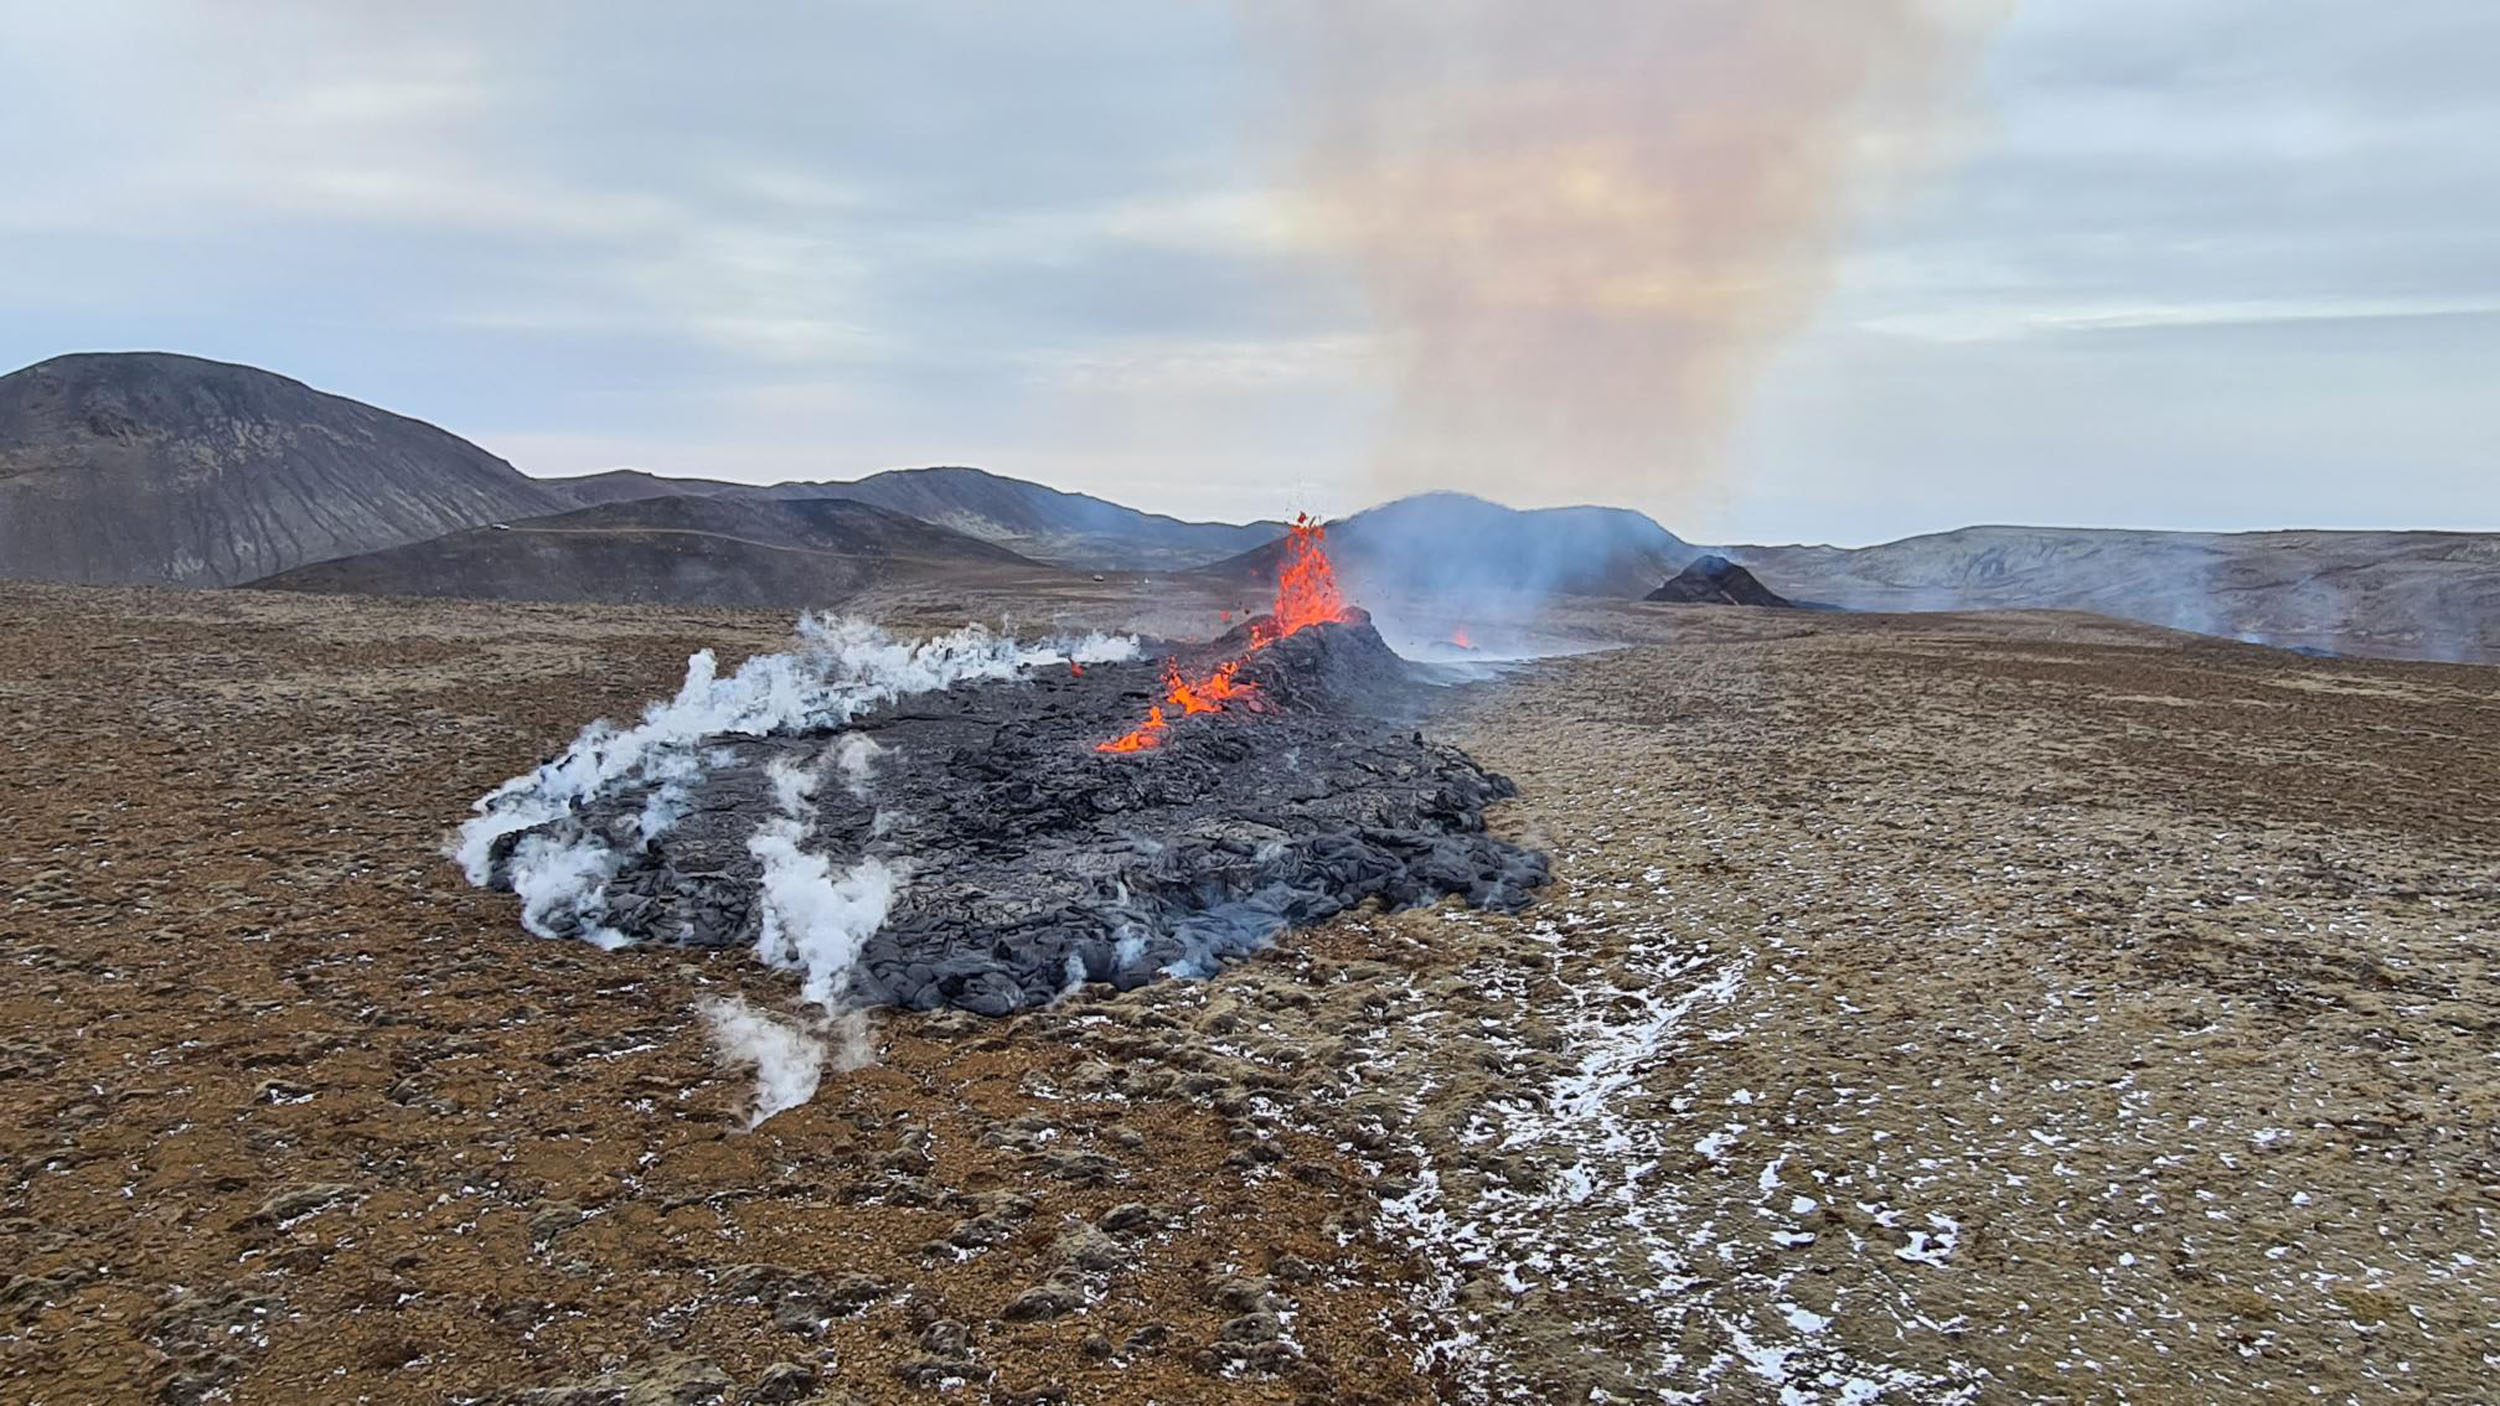 A handout picture released by the Icelandic Department of Civil Protection and Emergency Management shows lava flowing from a crack near Grindavik, on April 5, 2021. - The volcanic eruption, which has been ongoing for more than two weeks in Iceland about 40 kilometers from Reykjavik, spread on April 5, 2021 with a new fault spewing lava, according to the meteorological institute and live images from Icelandic television. (Photo by Handout / Icelandic Department of Civil Protection and Emergency Management / AFP) / RESTRICTED TO EDITORIAL USE - MANDATORY CREDIT "AFP PHOTO /ICELANDIC COAST GUARD " - NO MARKETING - NO ADVERTISING CAMPAIGNS - DISTRIBUTED AS A SERVICE TO CLIENTS